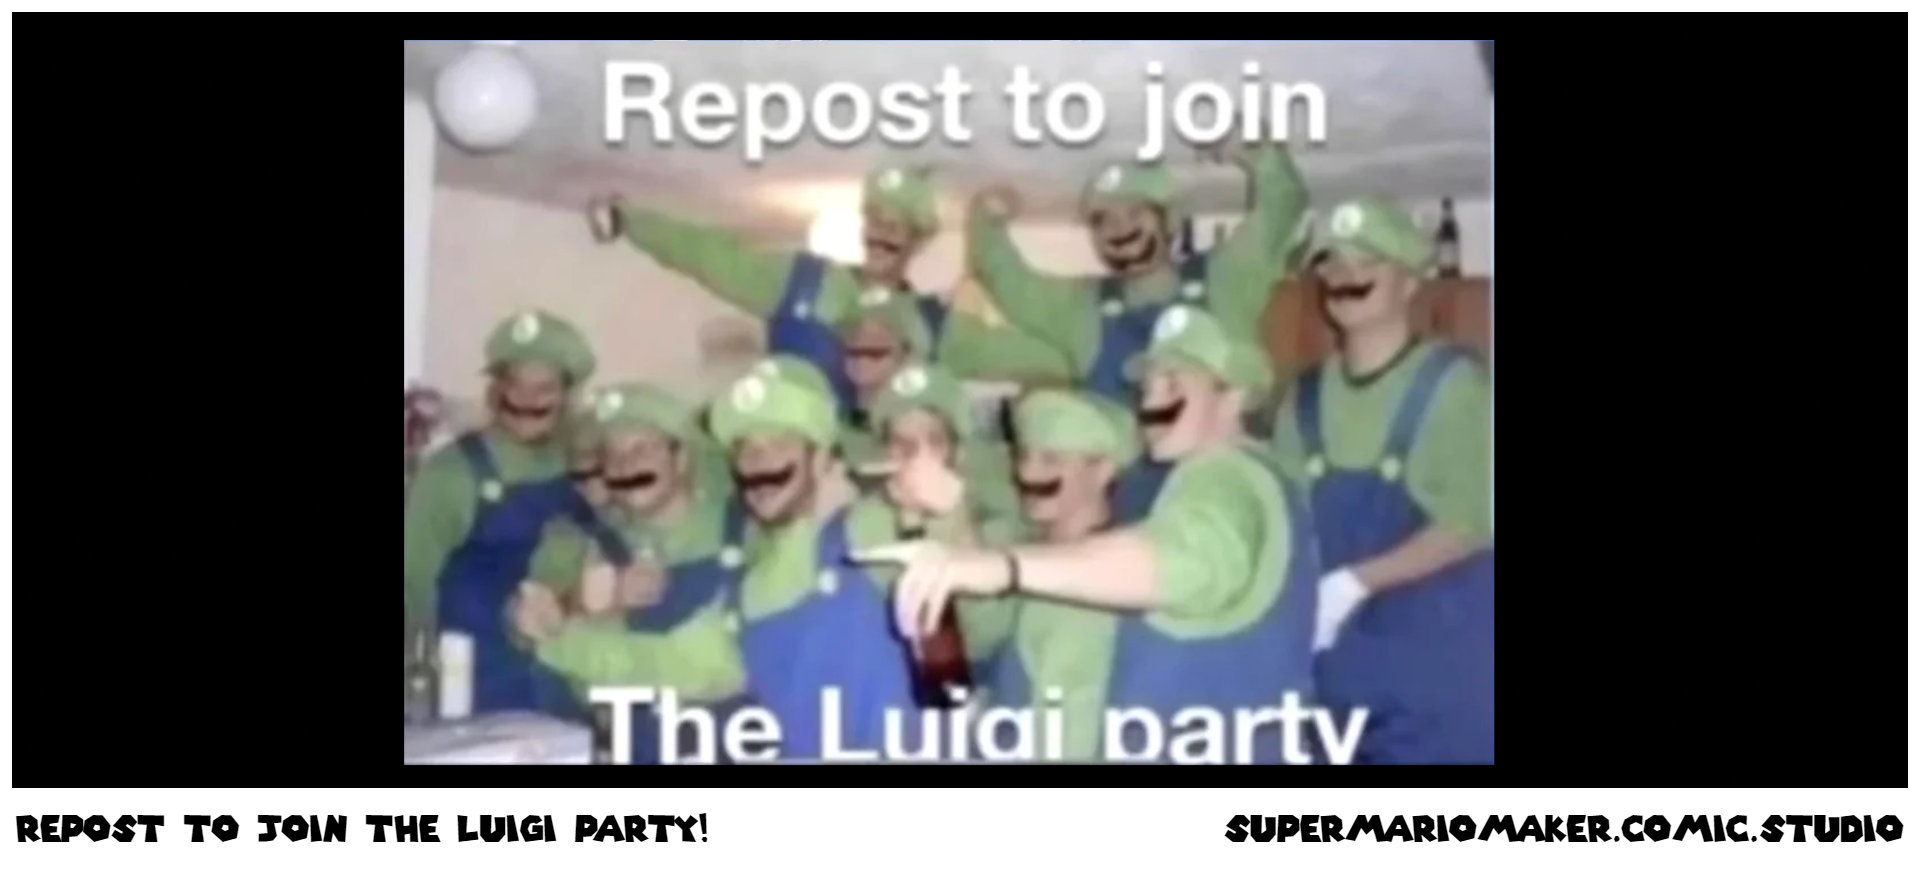 Repost To Join The Luigi Party!